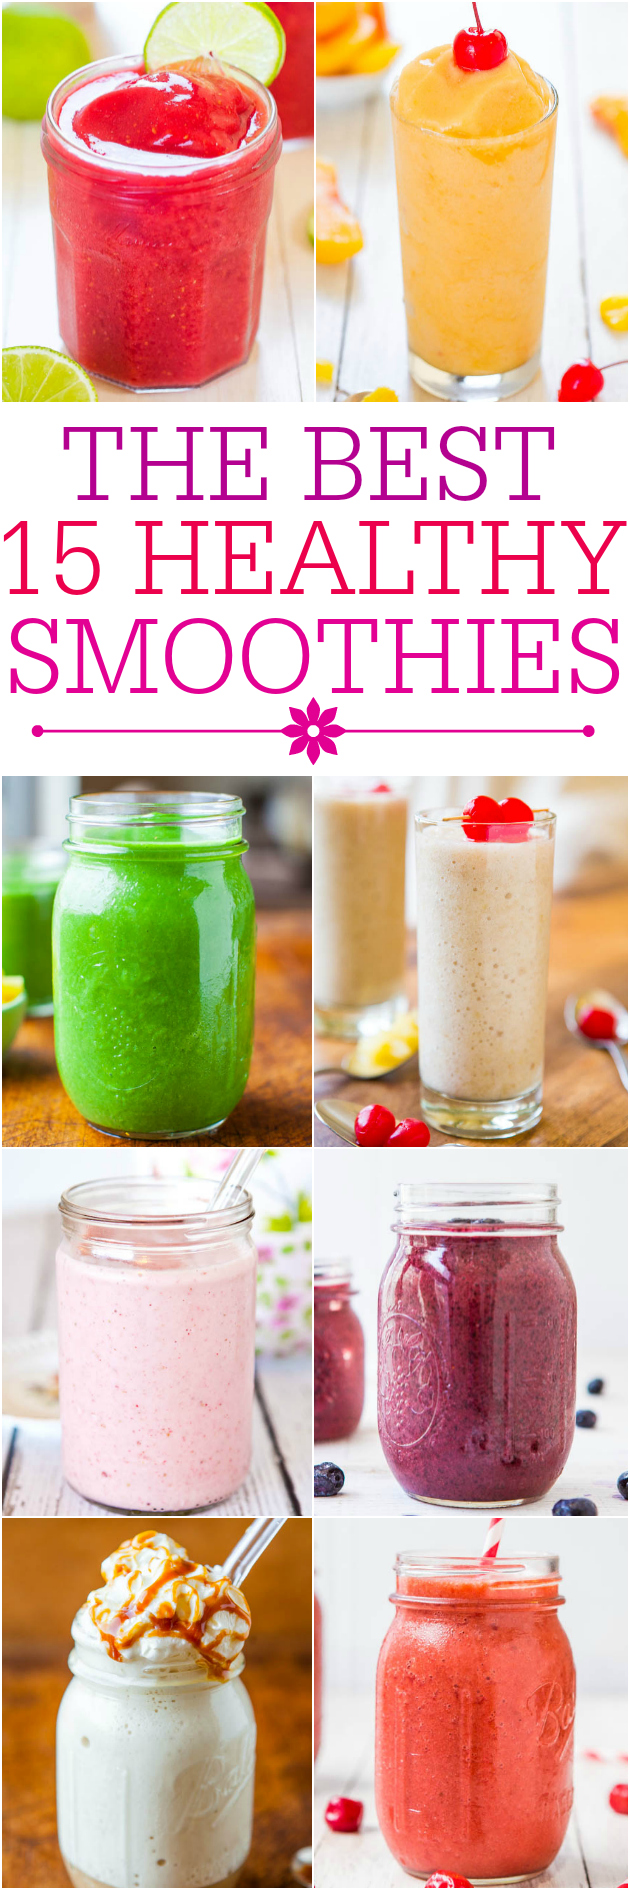 15+ EASY Healthy Breakfast Smoothies - Averie Cooks